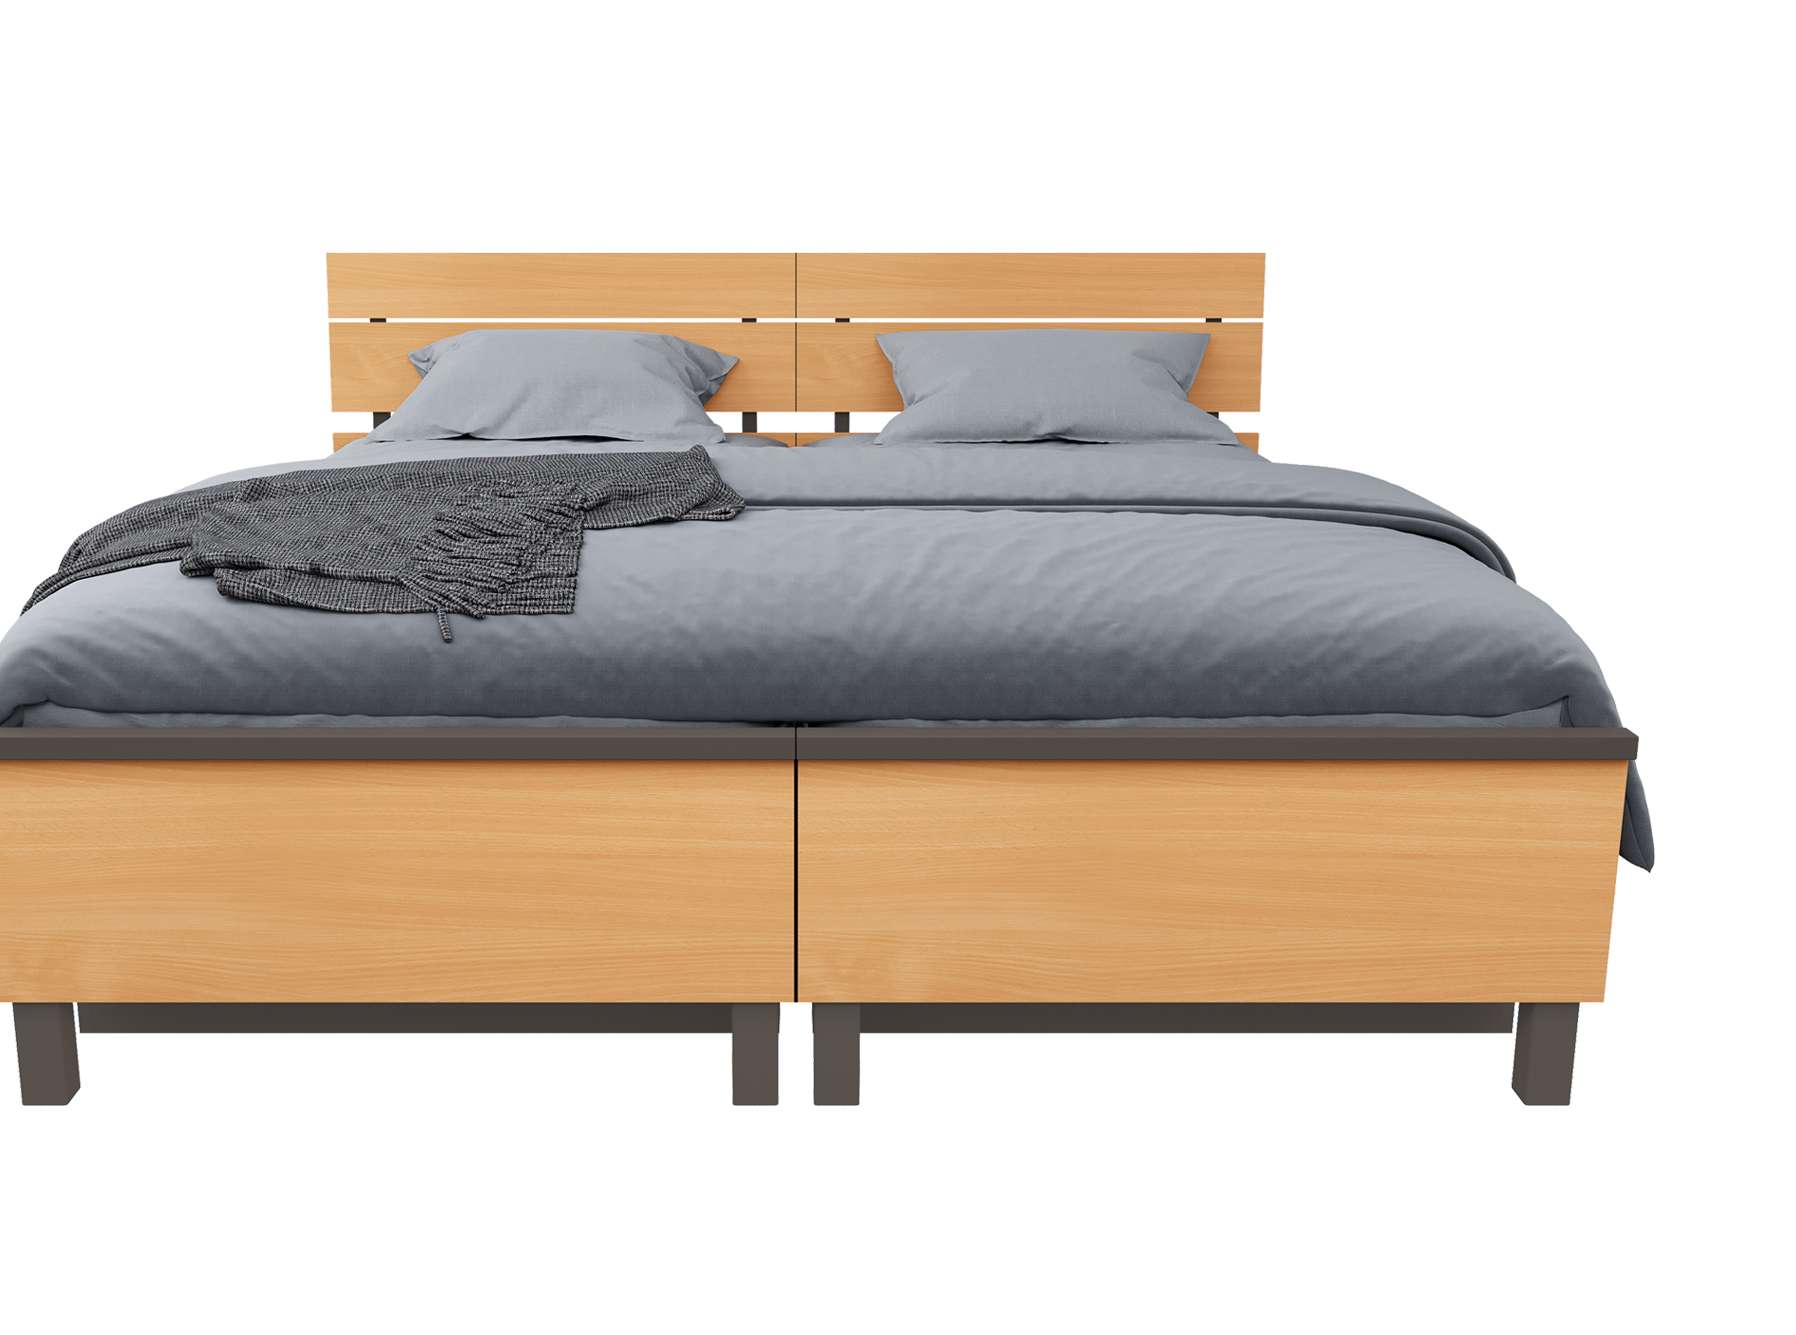 Tailor-made support in the Relax bed frame